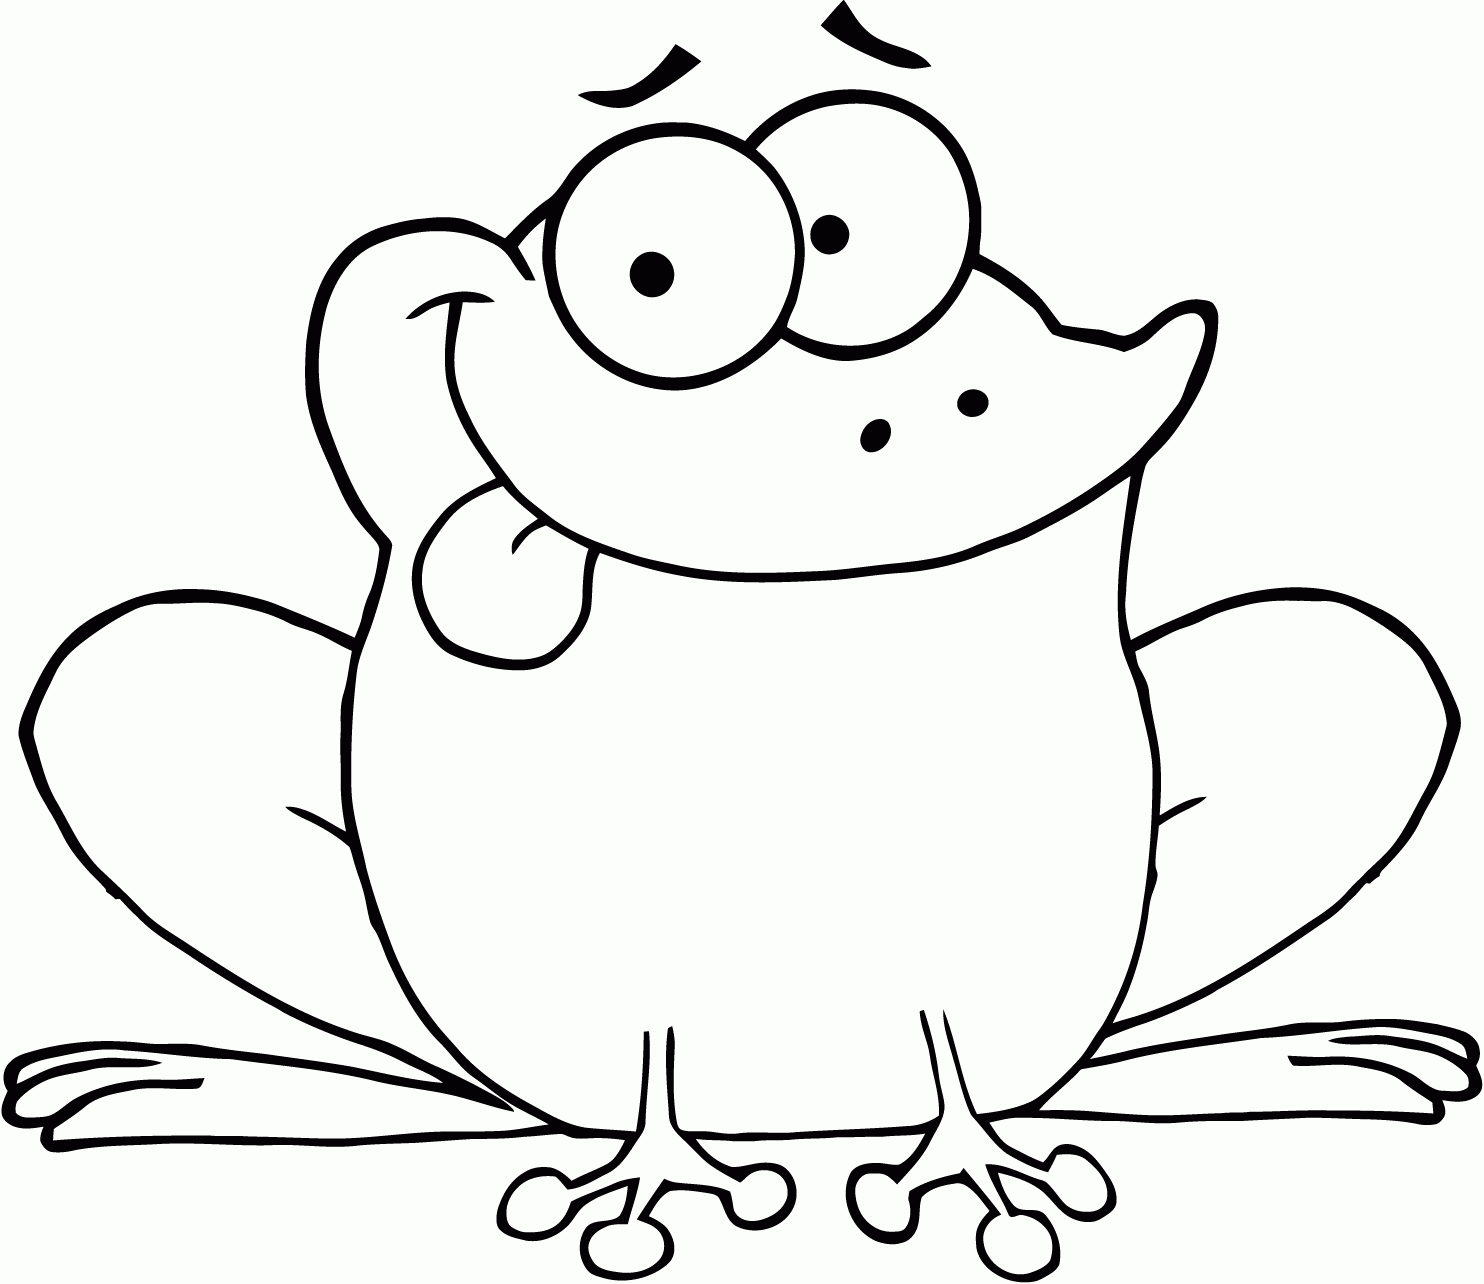 Related Frog Coloring Pages item-10241, Frog Coloring Pages ...